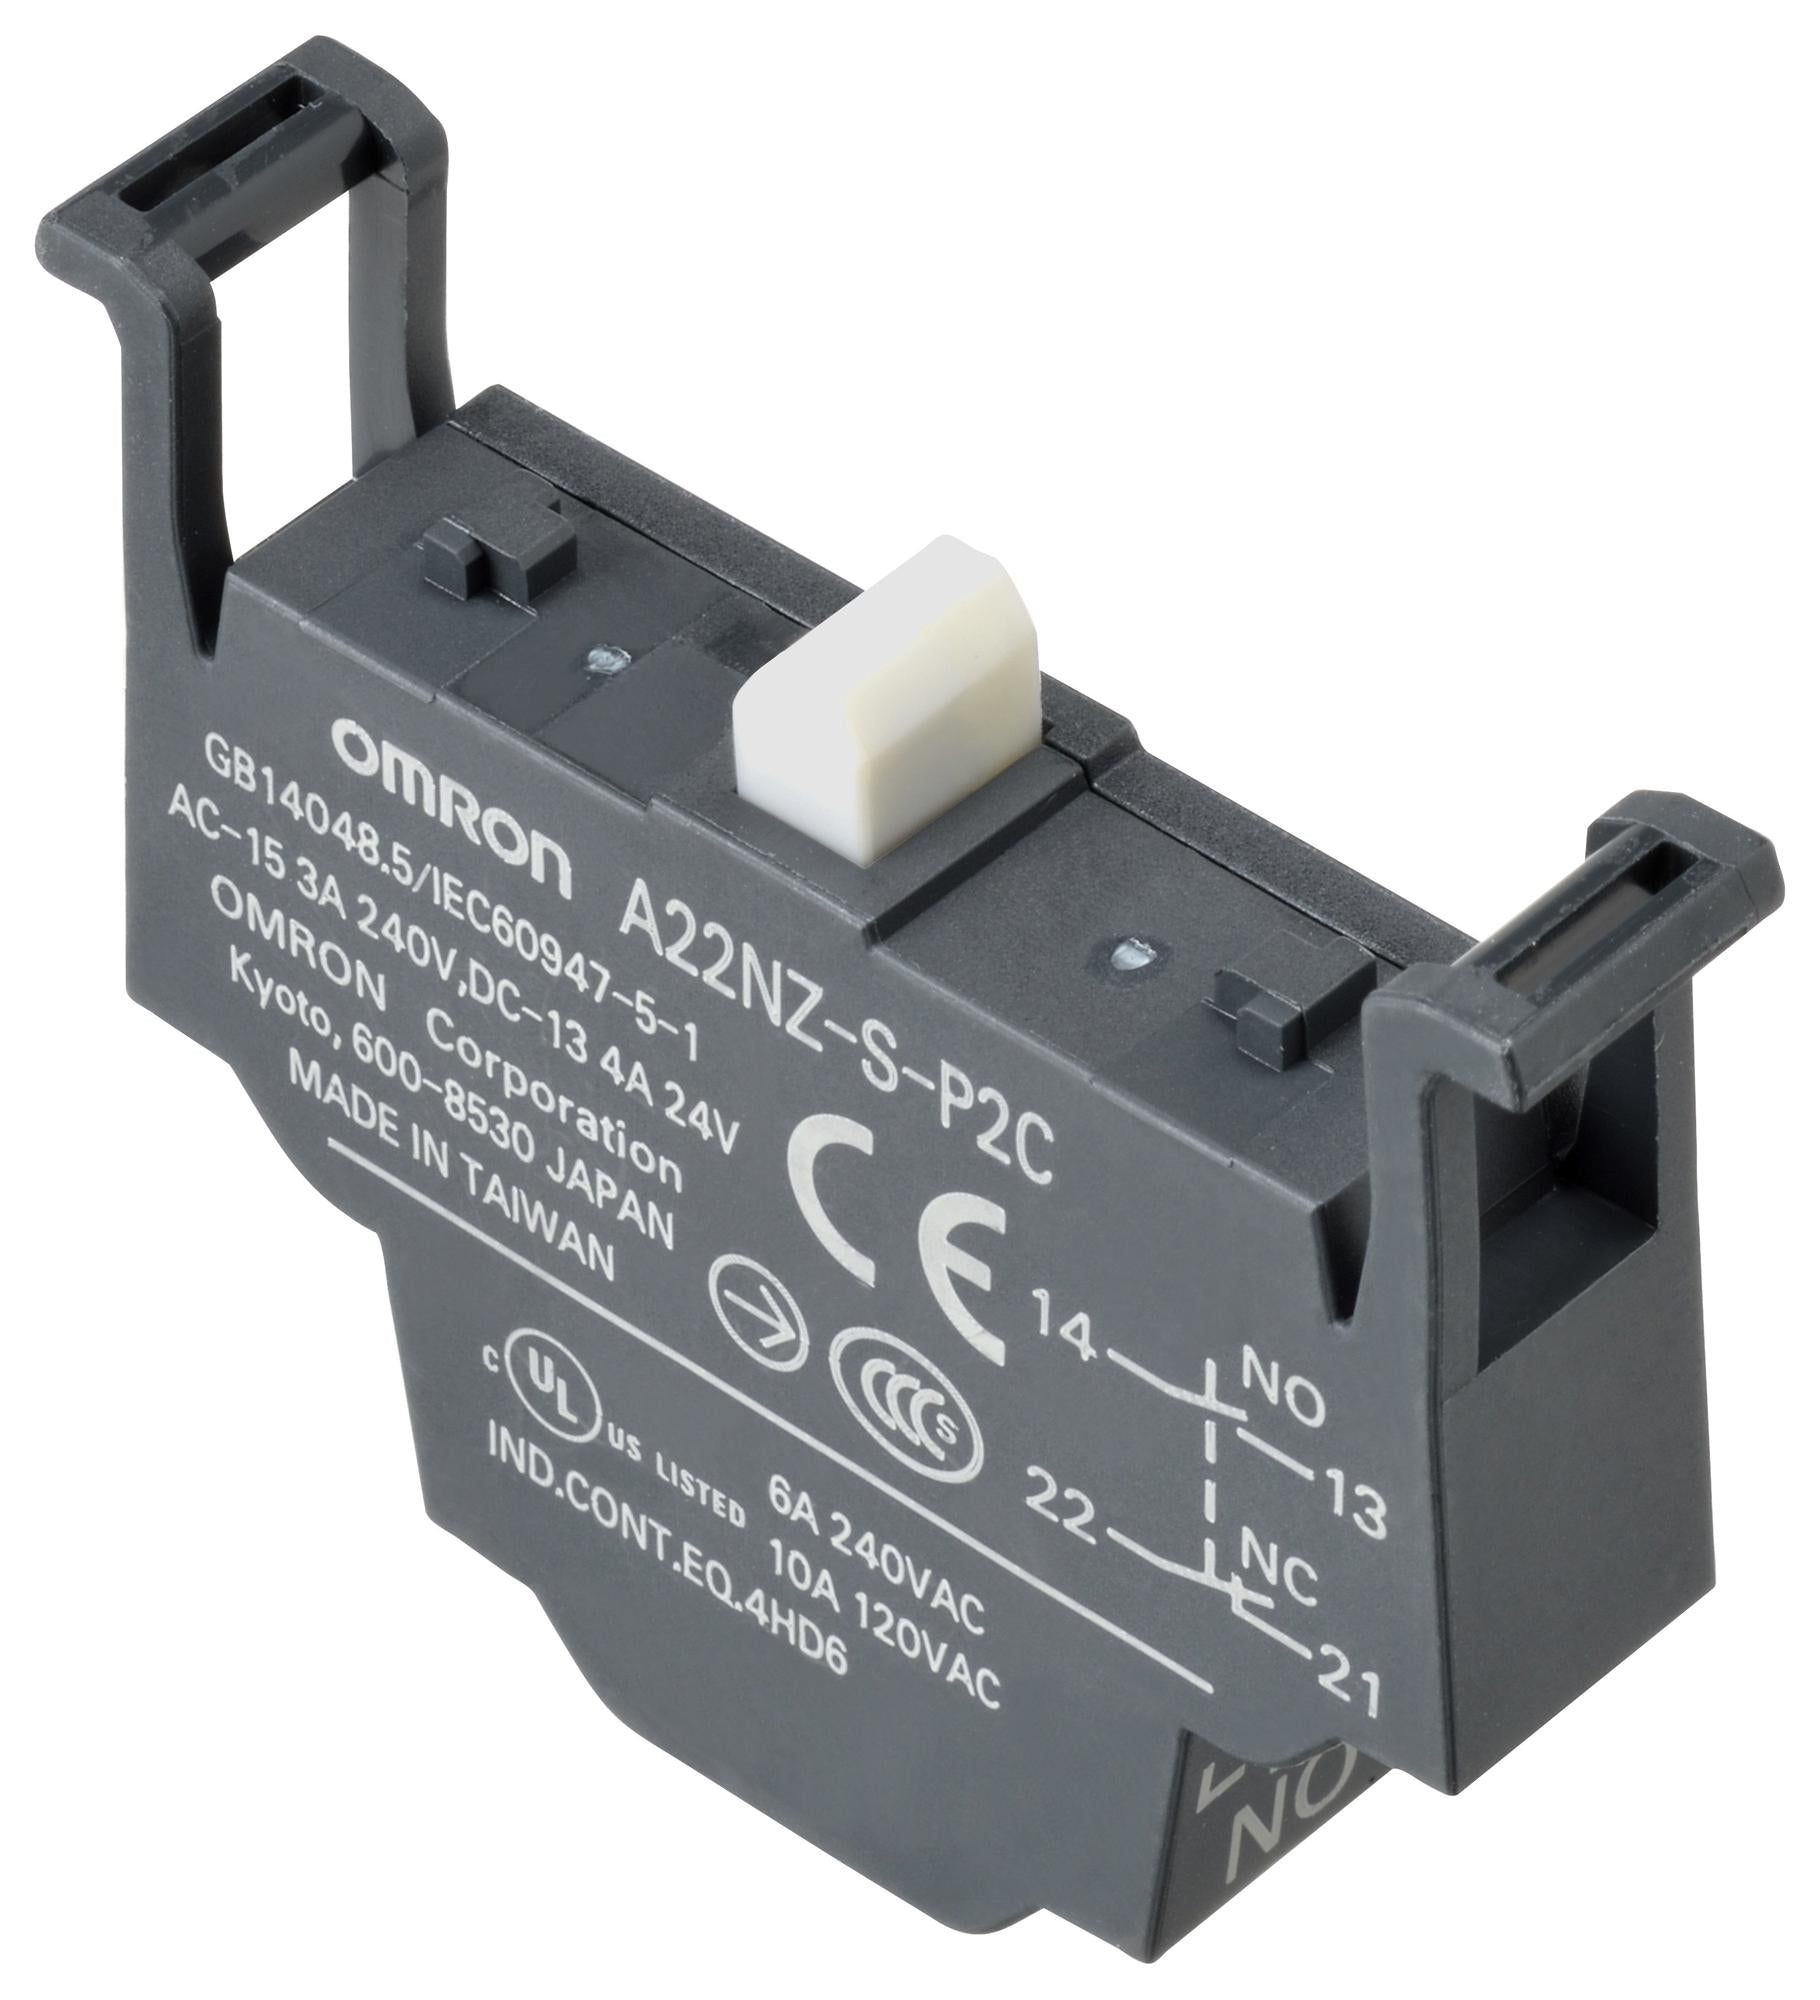 A22NZ-S-P2C CONTACT BLOCKS SWITCH COMPONENTS OMRON